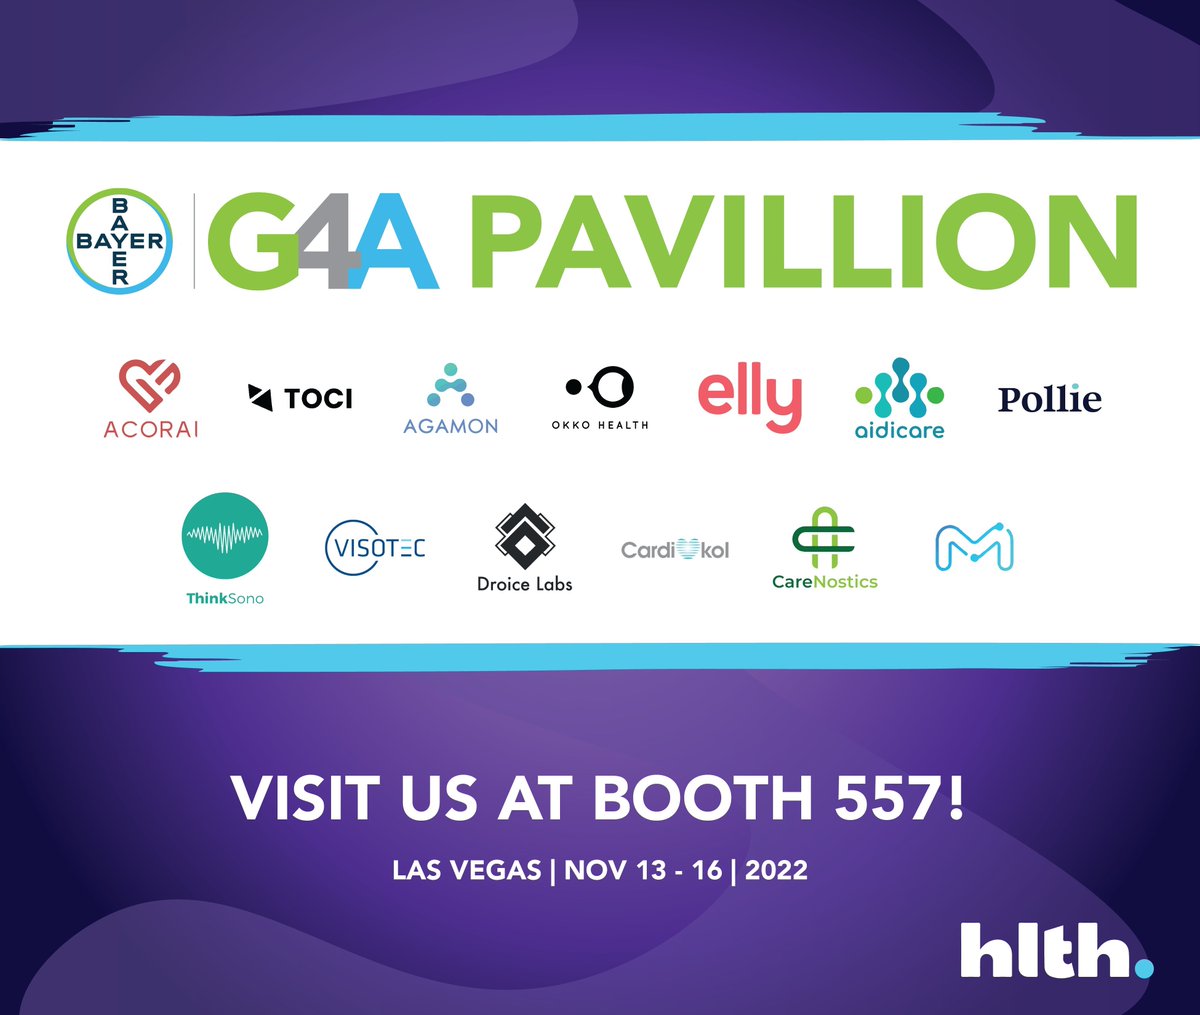 Join @G4Ahealth at the #G4A Startup Pavilion at HLTH in Las Vegas from November 13-16. Visit booth #557 to meet the #G4A team and 14 of their alumni companies! RSVP & book your meeting with the alumni companies or Bayer G4A team here: g4aathlth.splashthat.com